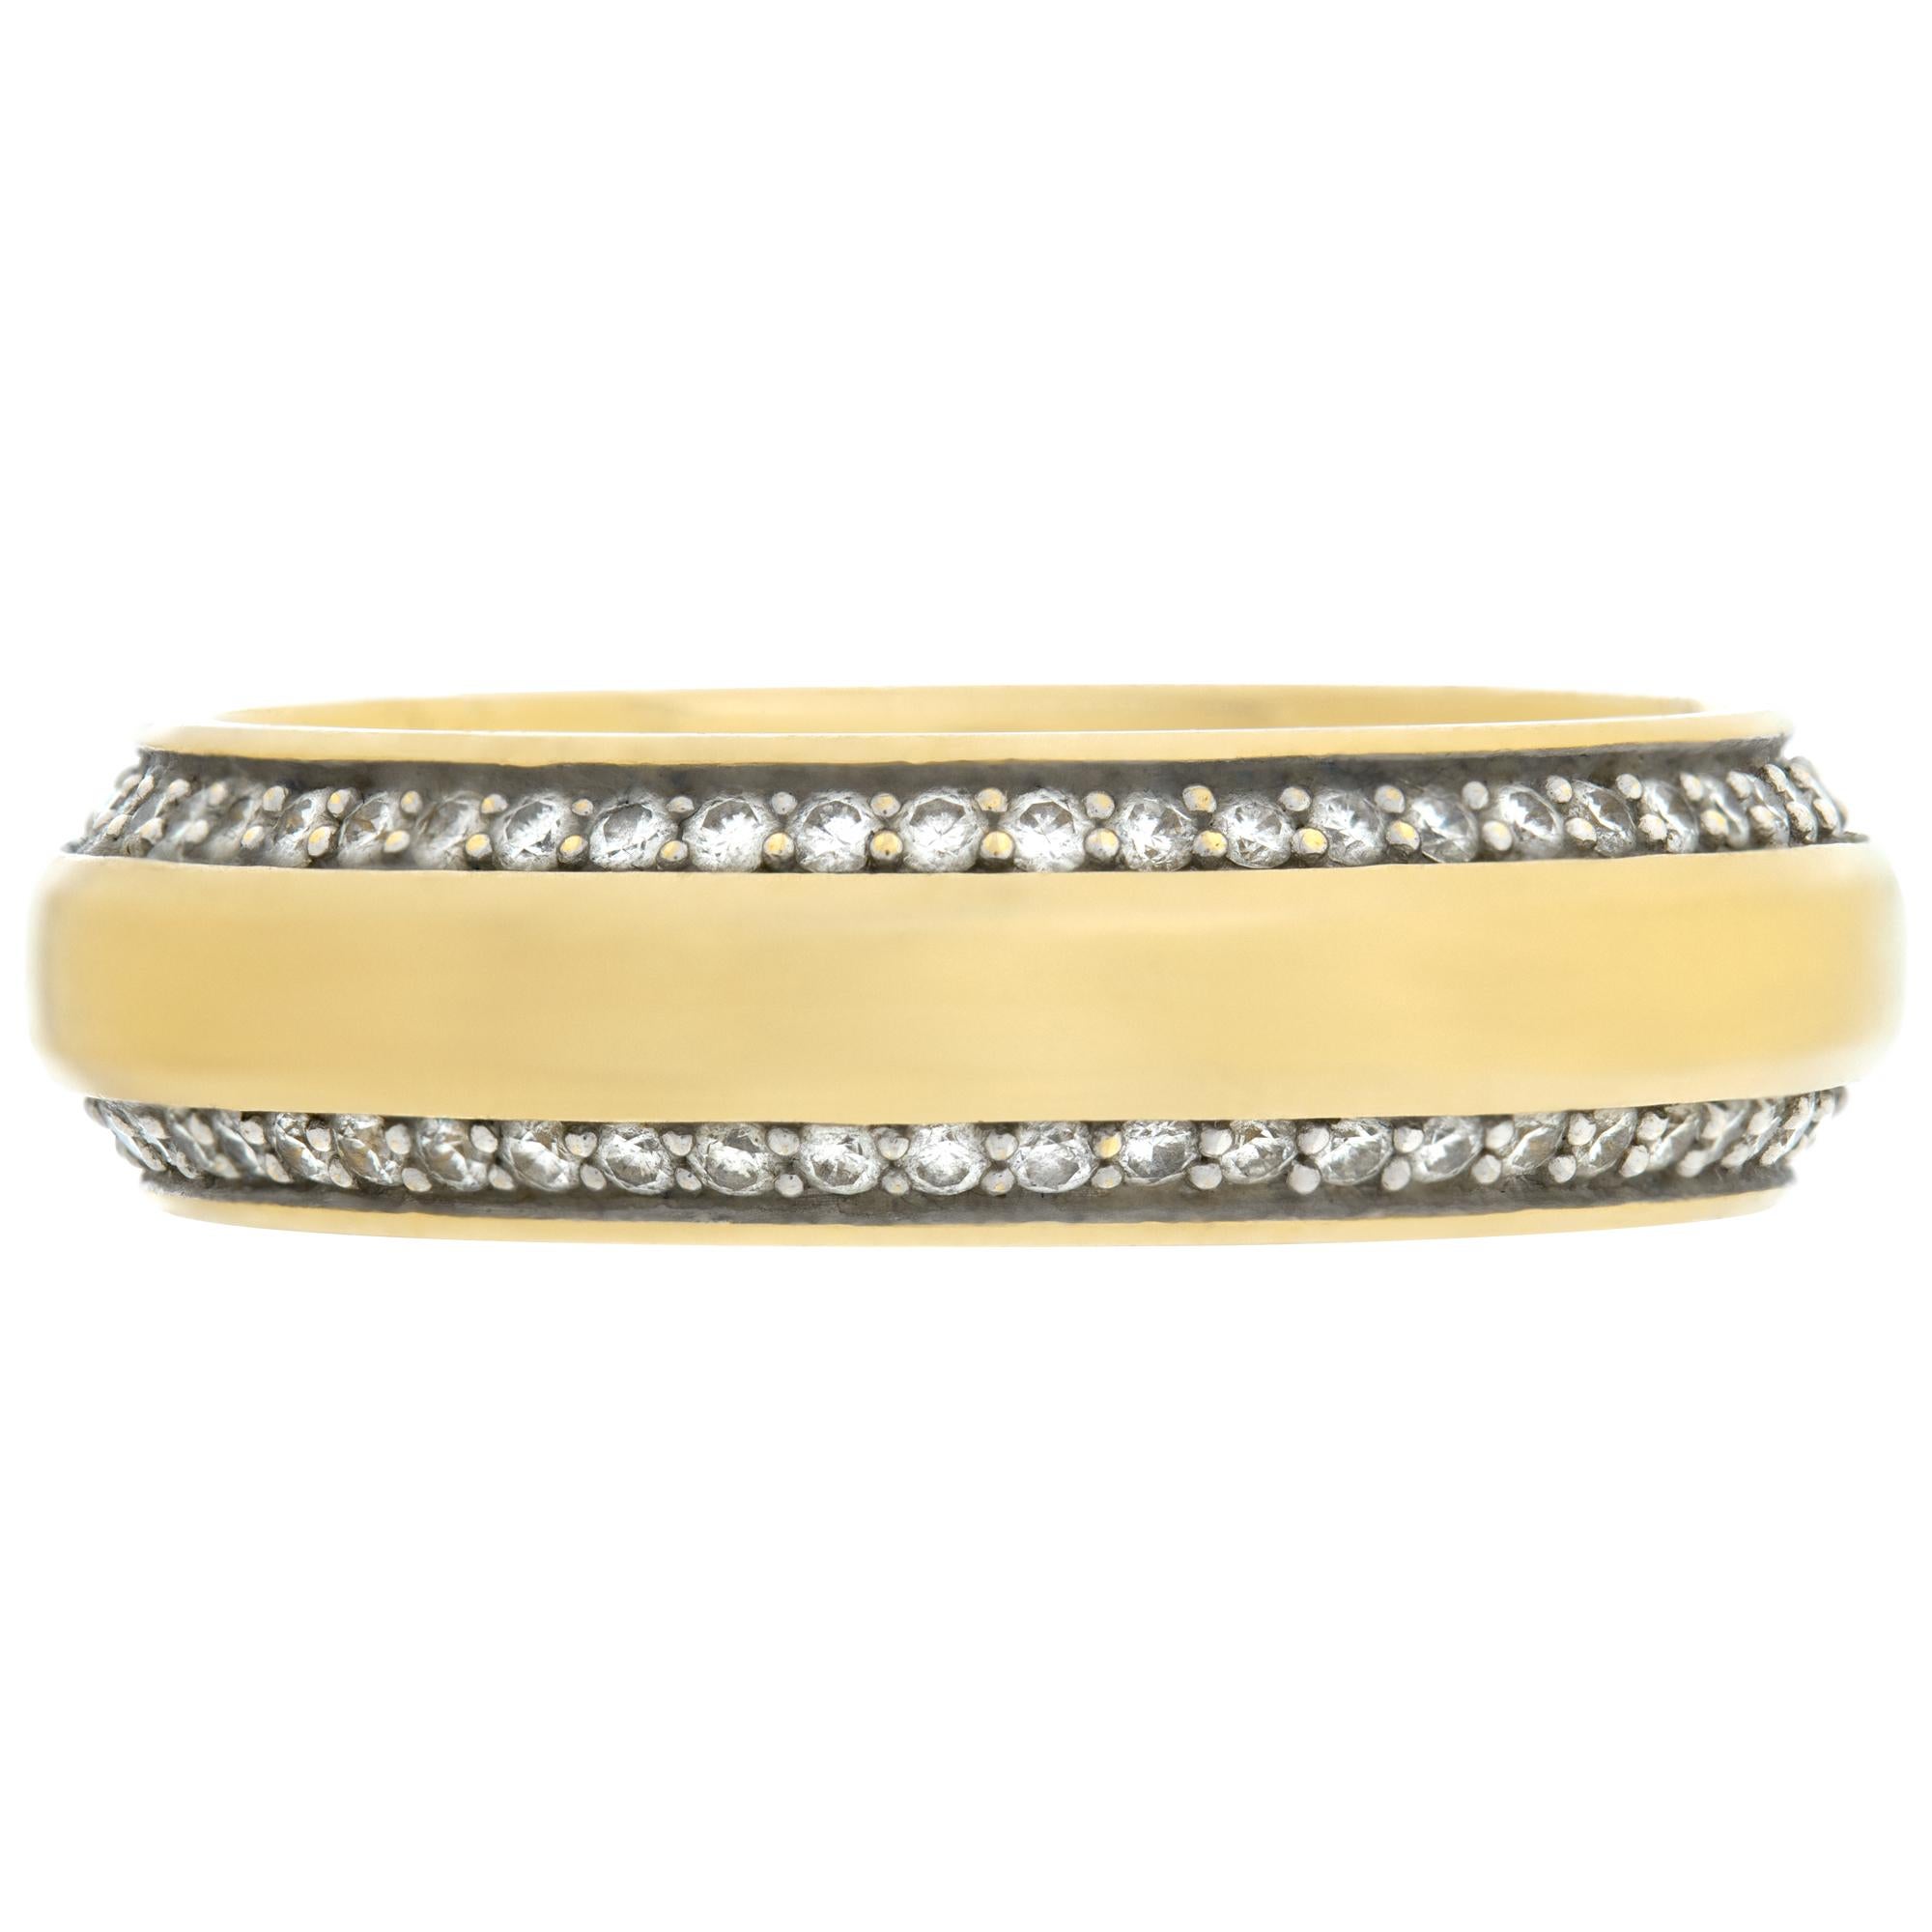 David Yurman diamonds wedding band in 18K yellow and white gold. Round brilliant diamonds total approx. weight:0.67 carat. 6mm width. Ring size 10. Comes with original box.

This David Yurman ring is currently size 10 and some items can be sized up